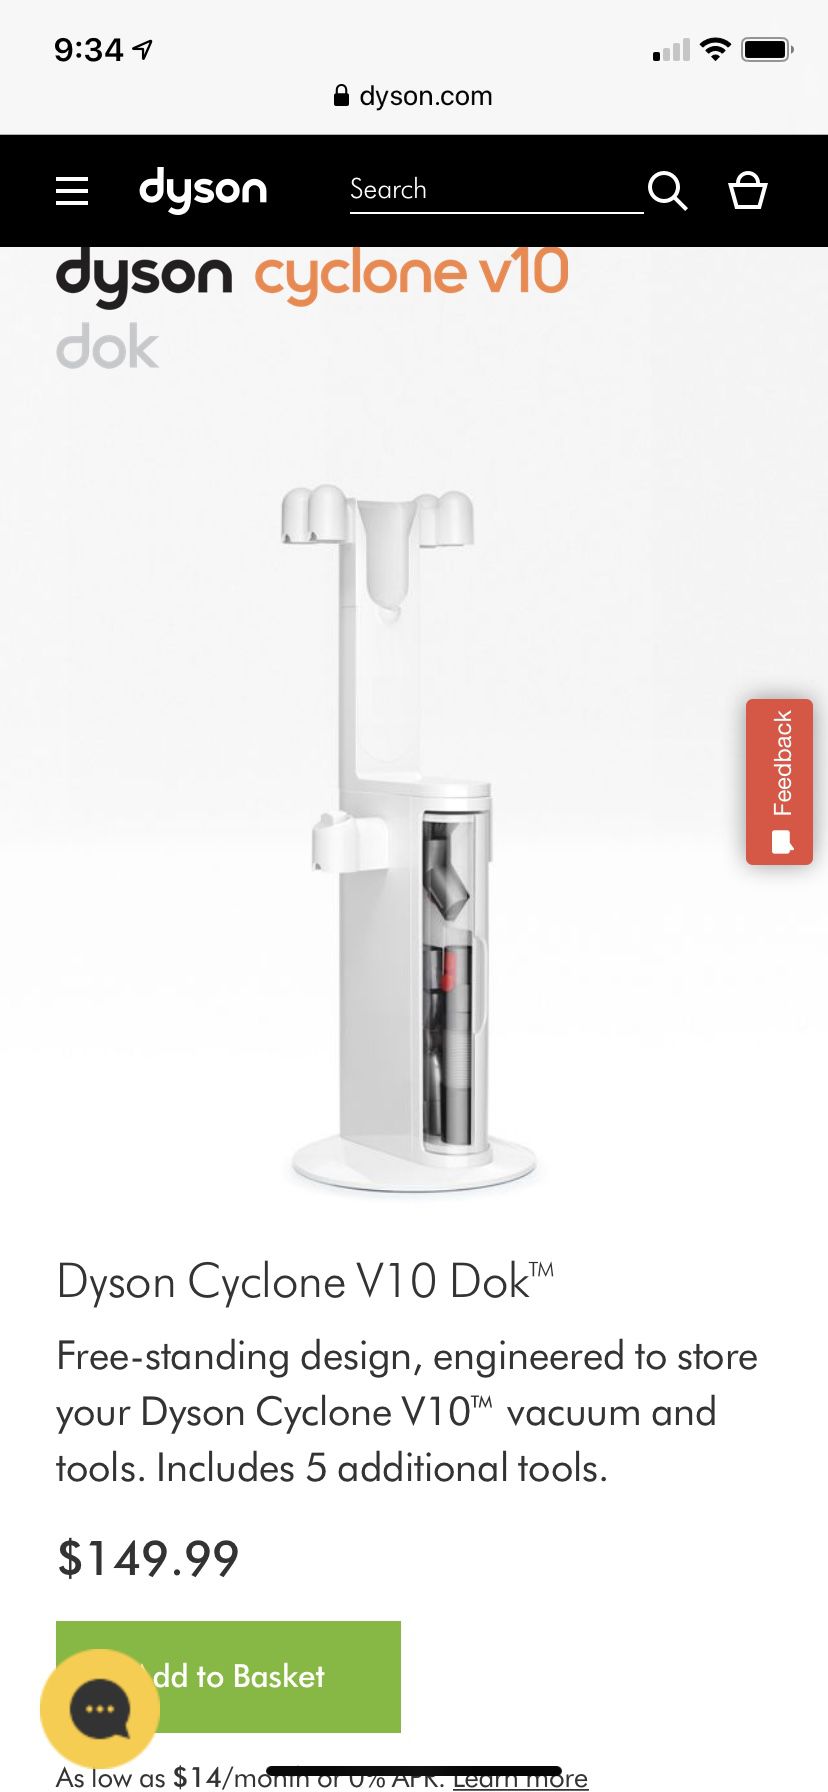 Dyson V10 Docking station and accessories